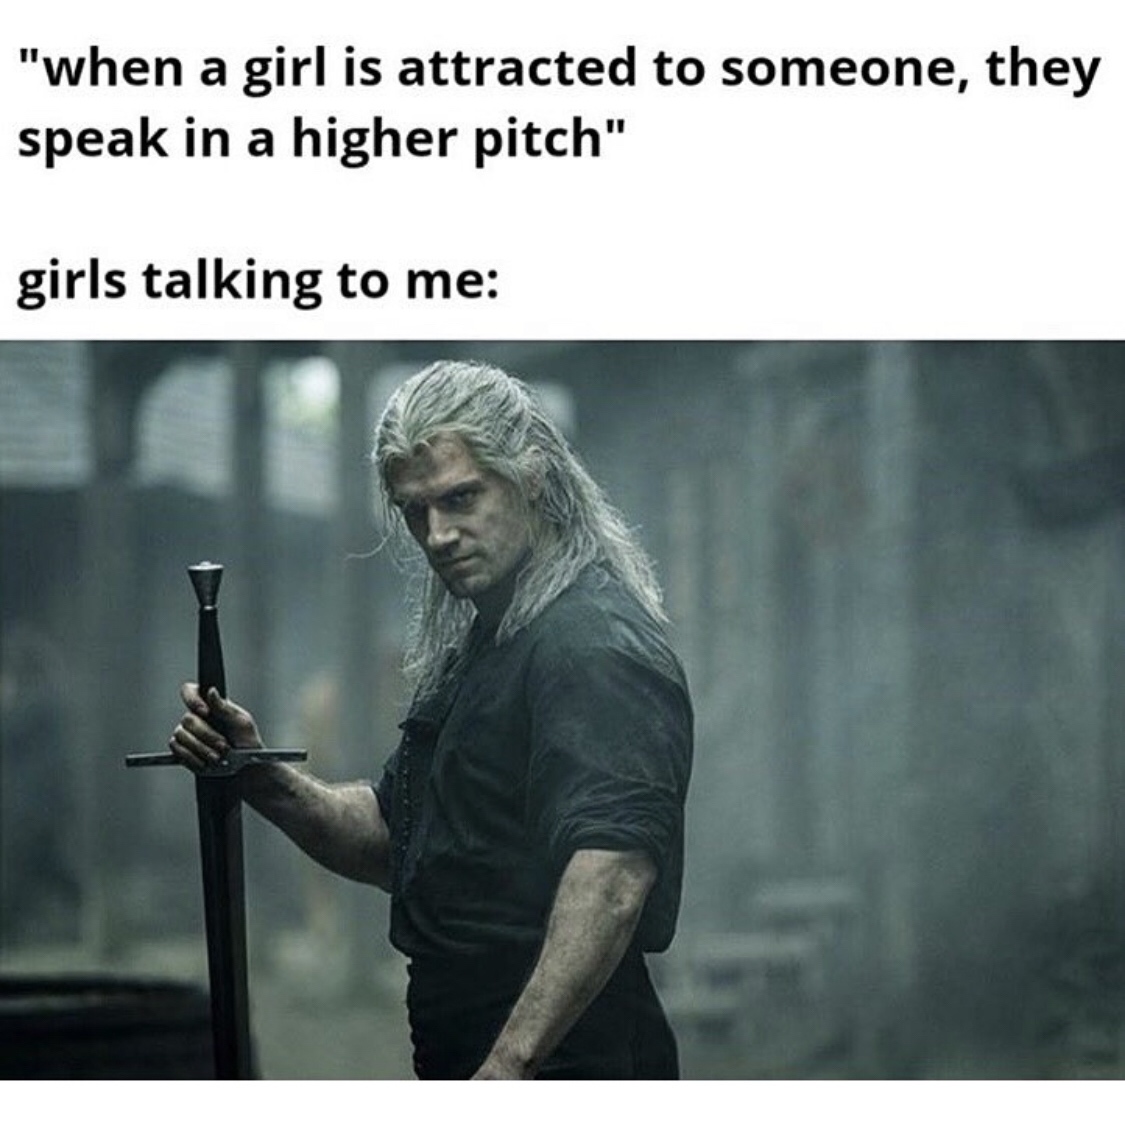 witcher tv series - "when a girl is attracted to someone, they speak in a higher pitch" girls talking to me